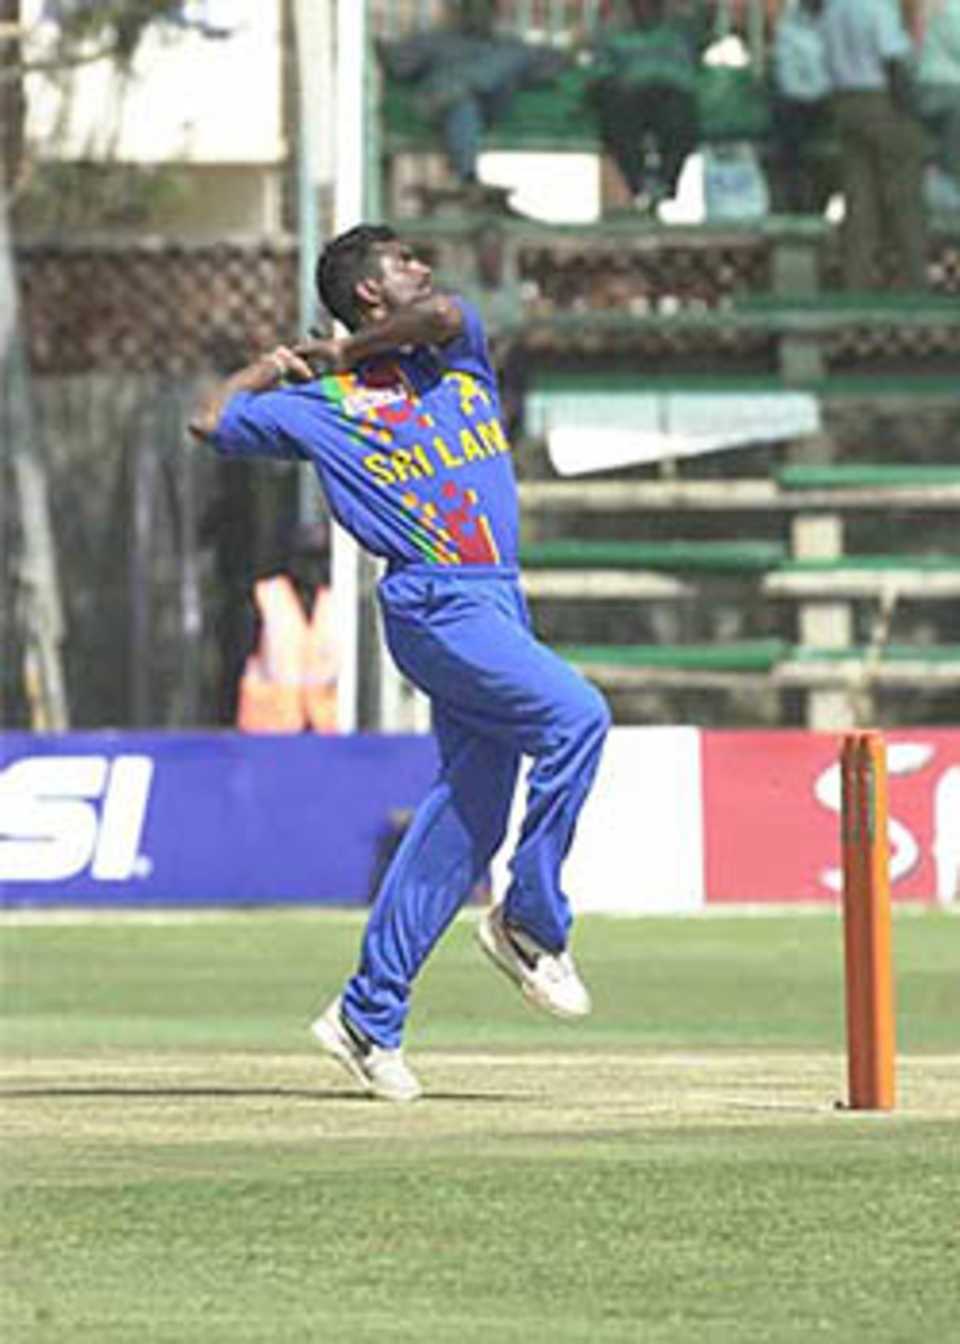 Muralitharan just about to deliver the ball, ICC KnockOut, 2000/01, 2nd Preliminary Quarter Final, Sri Lanka v West Indies, Gymkhana Club Ground, Nairobi, 04 October 2000.